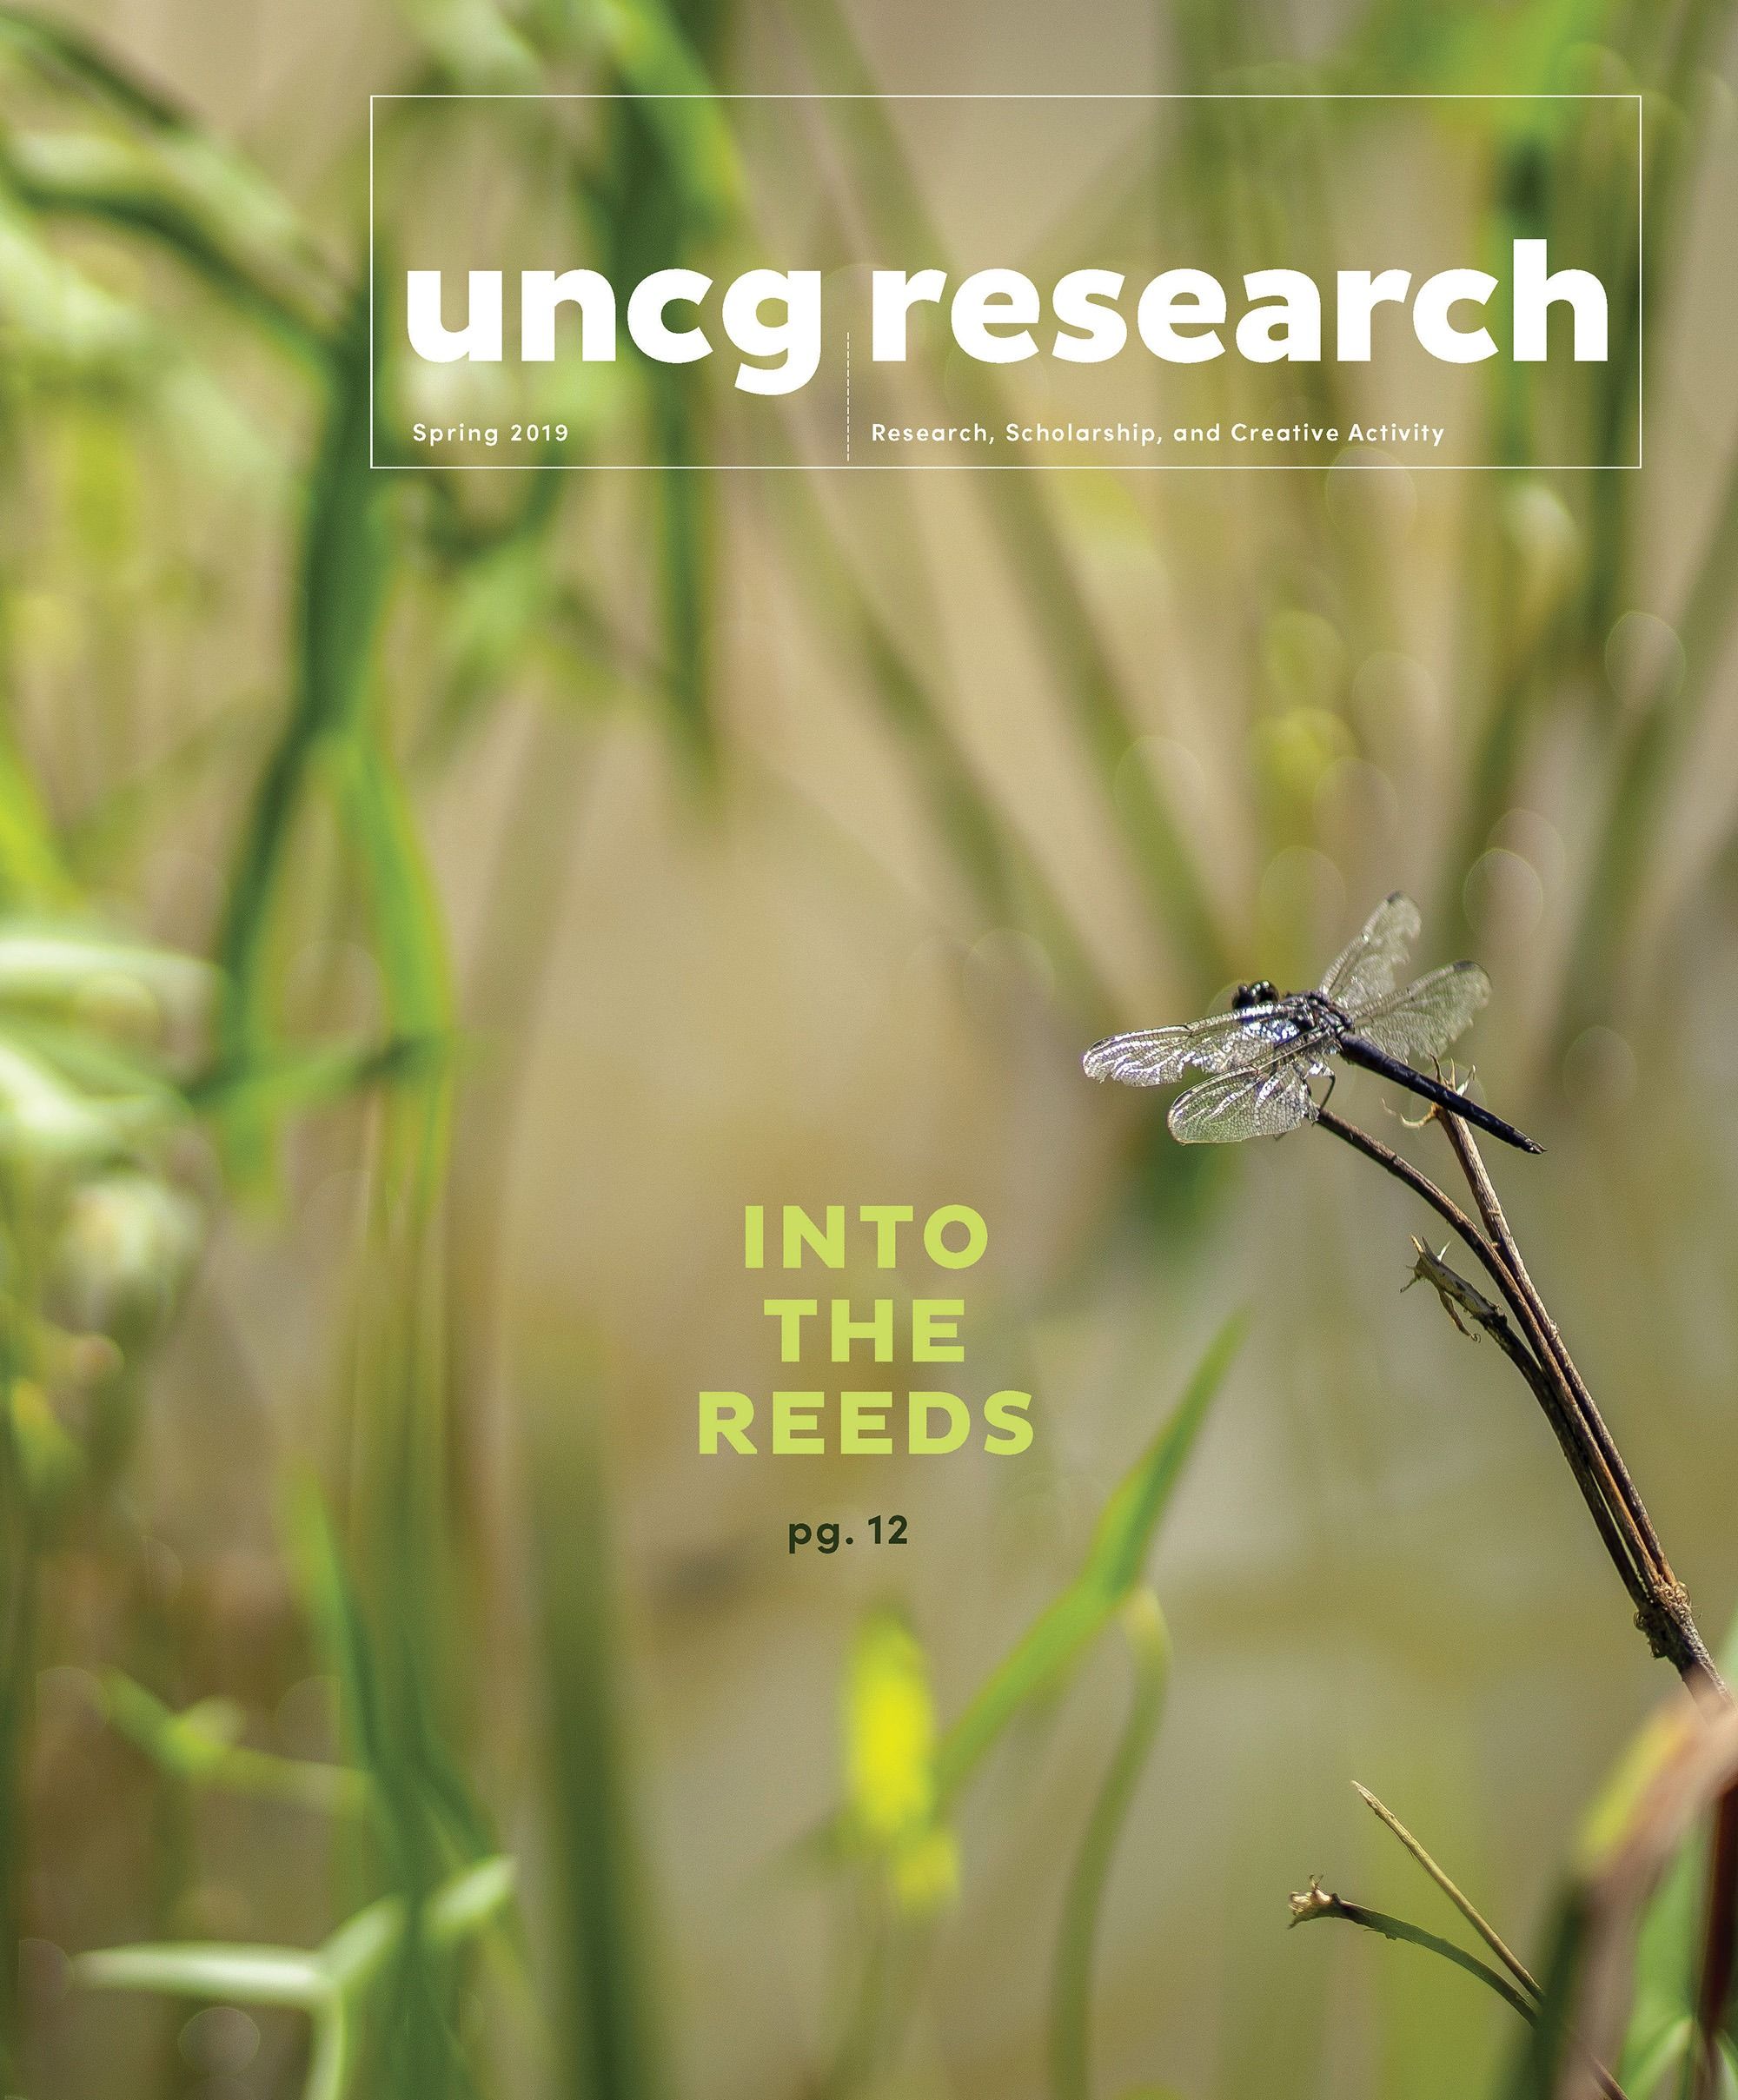 Cover of UNCG's Spring 2019 Research Magazine